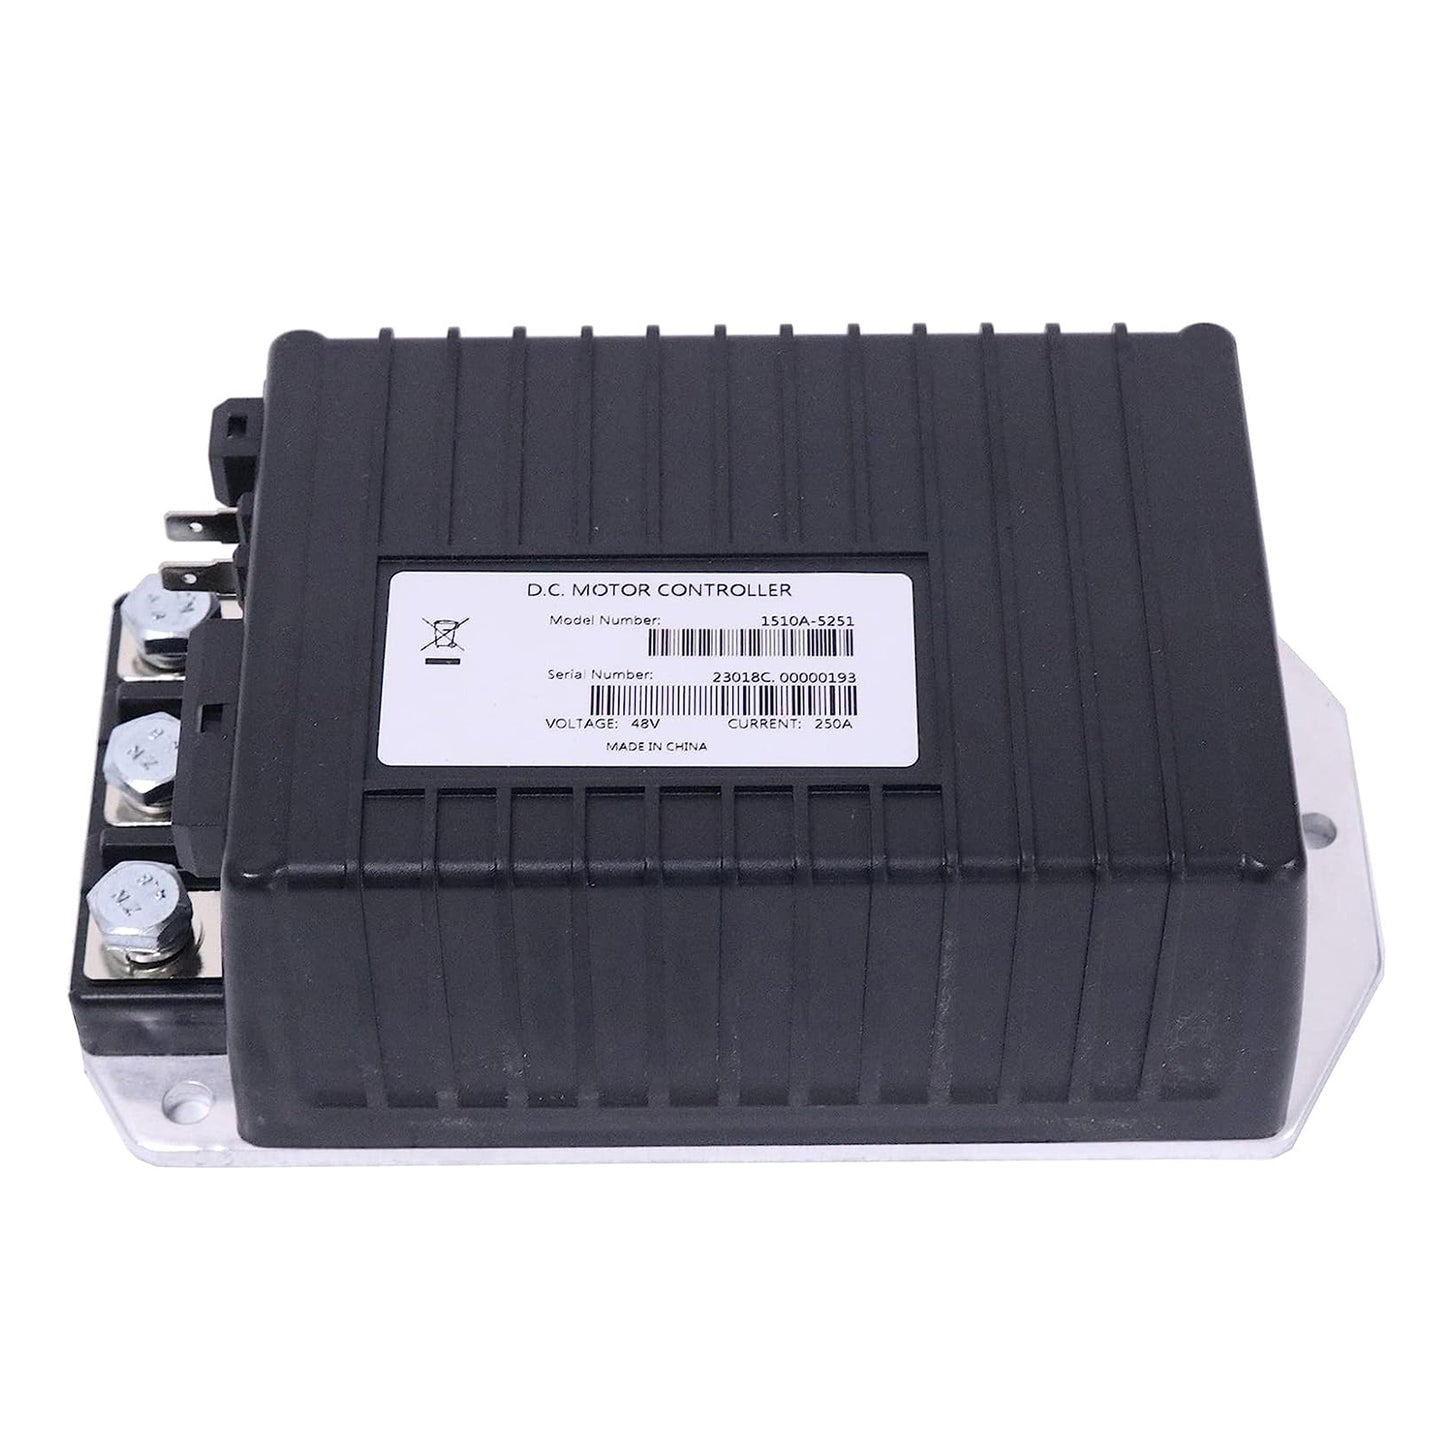 1510A-5251 48V 275A DC Motor Controller Compatible with Curtis Club Car Golf Cart